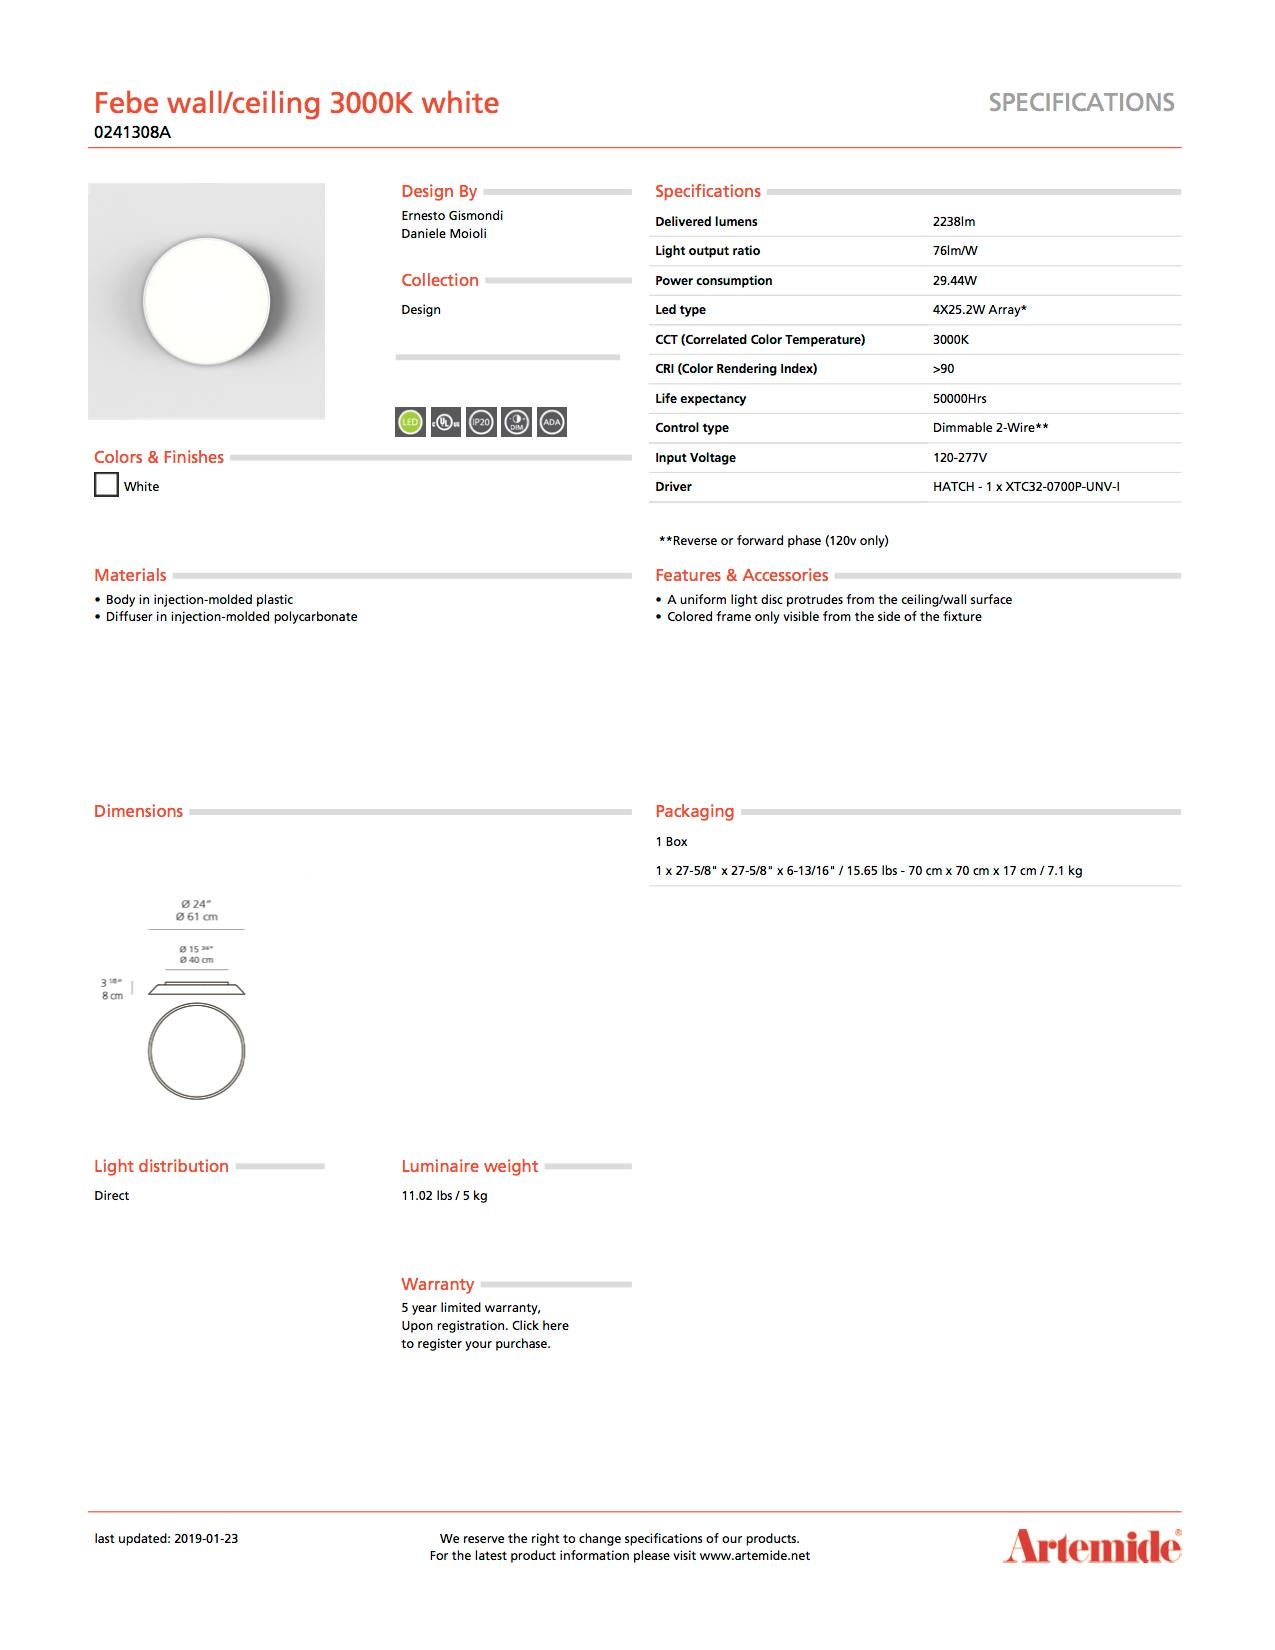 Plastic Artemide Febe Wall and Ceiling Light 3000k in White For Sale